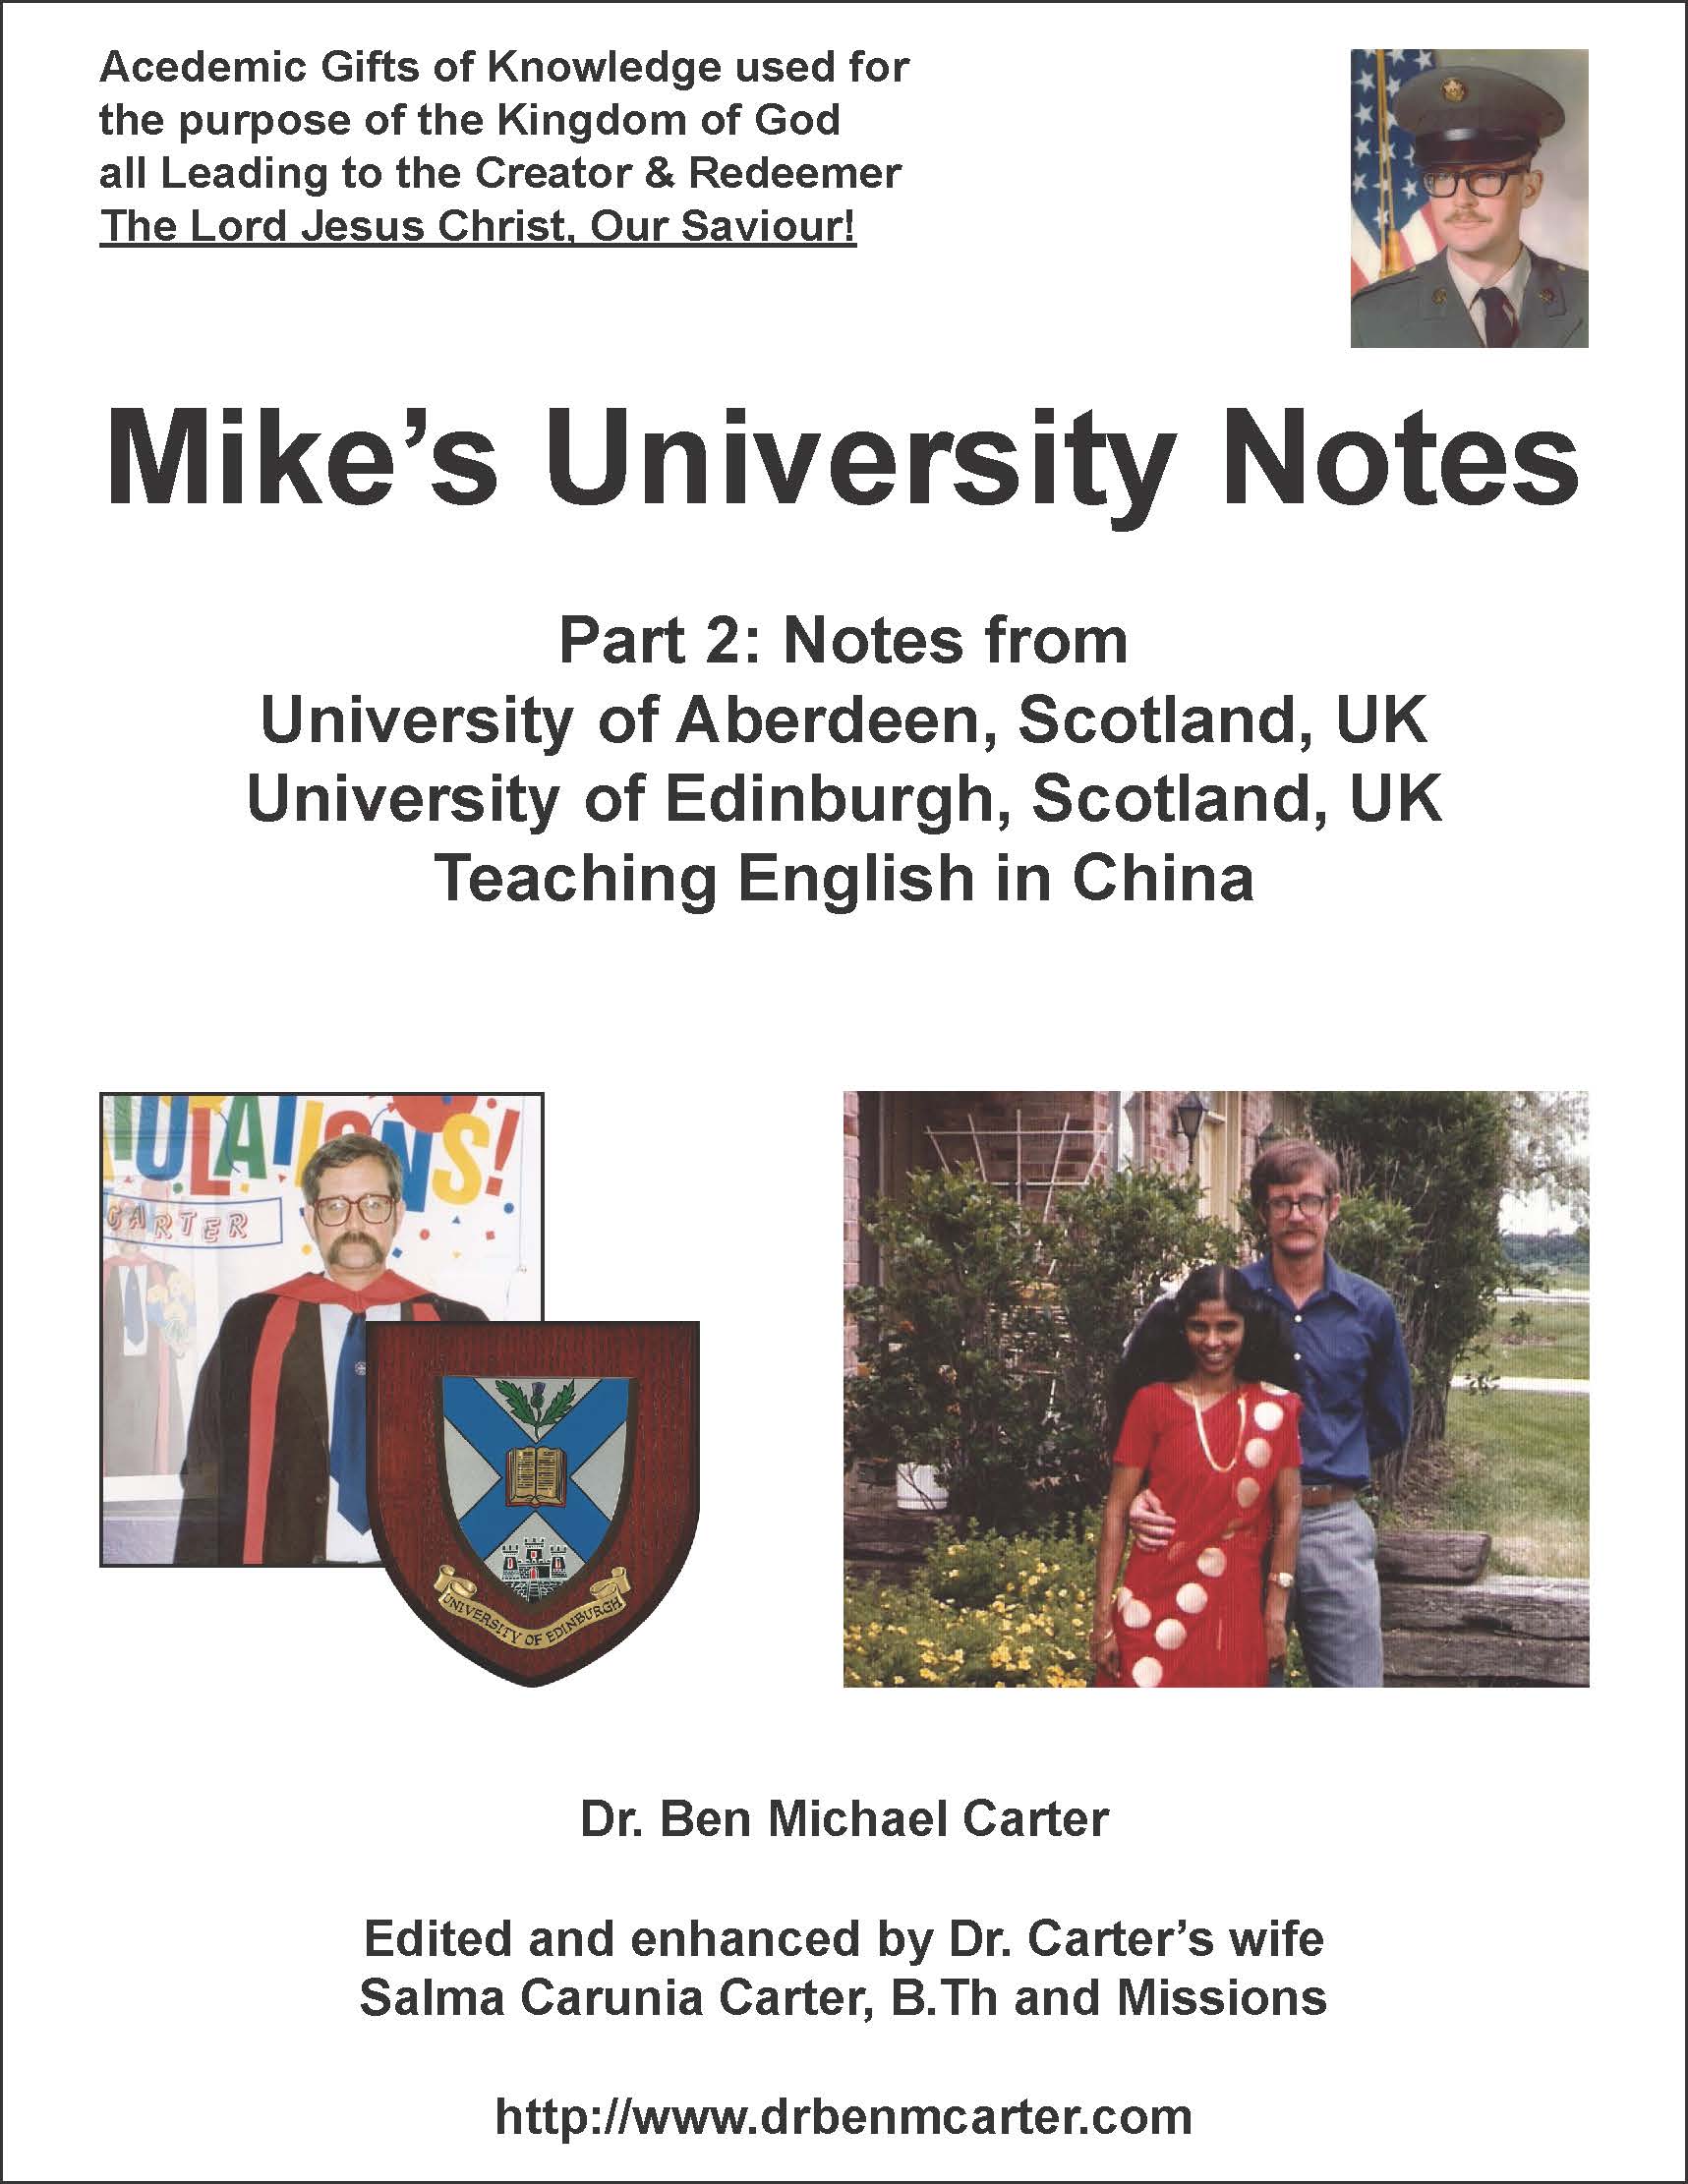 Mike's Notes from Aberdeen